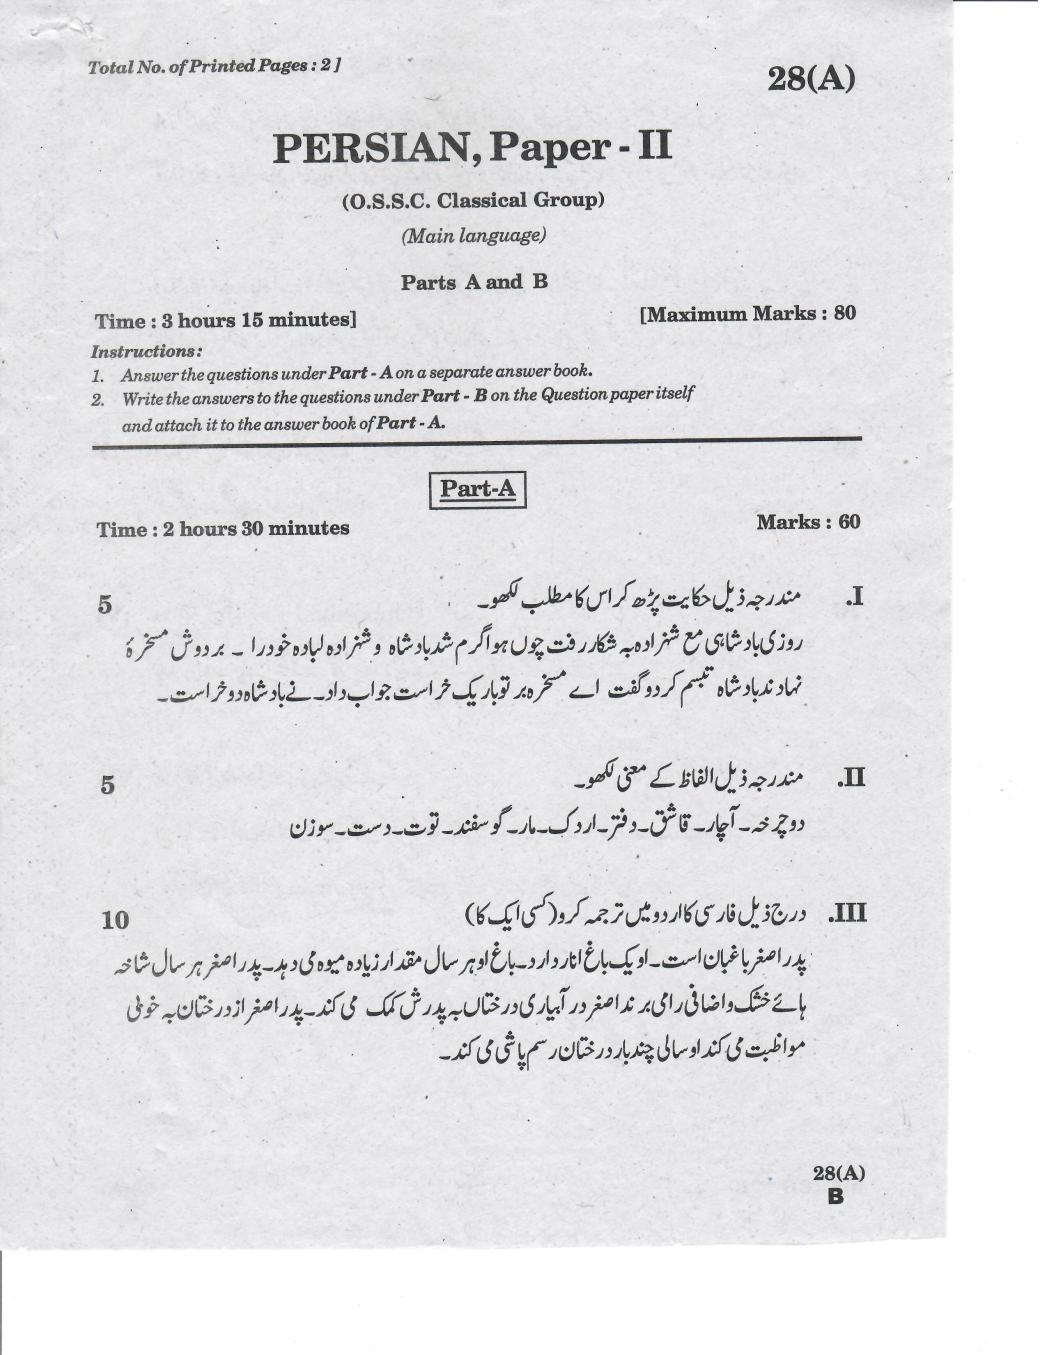 AP 10th Class Question Paper 2019 Persian - Paper 2 (OSSC Classical Group) - Page 1